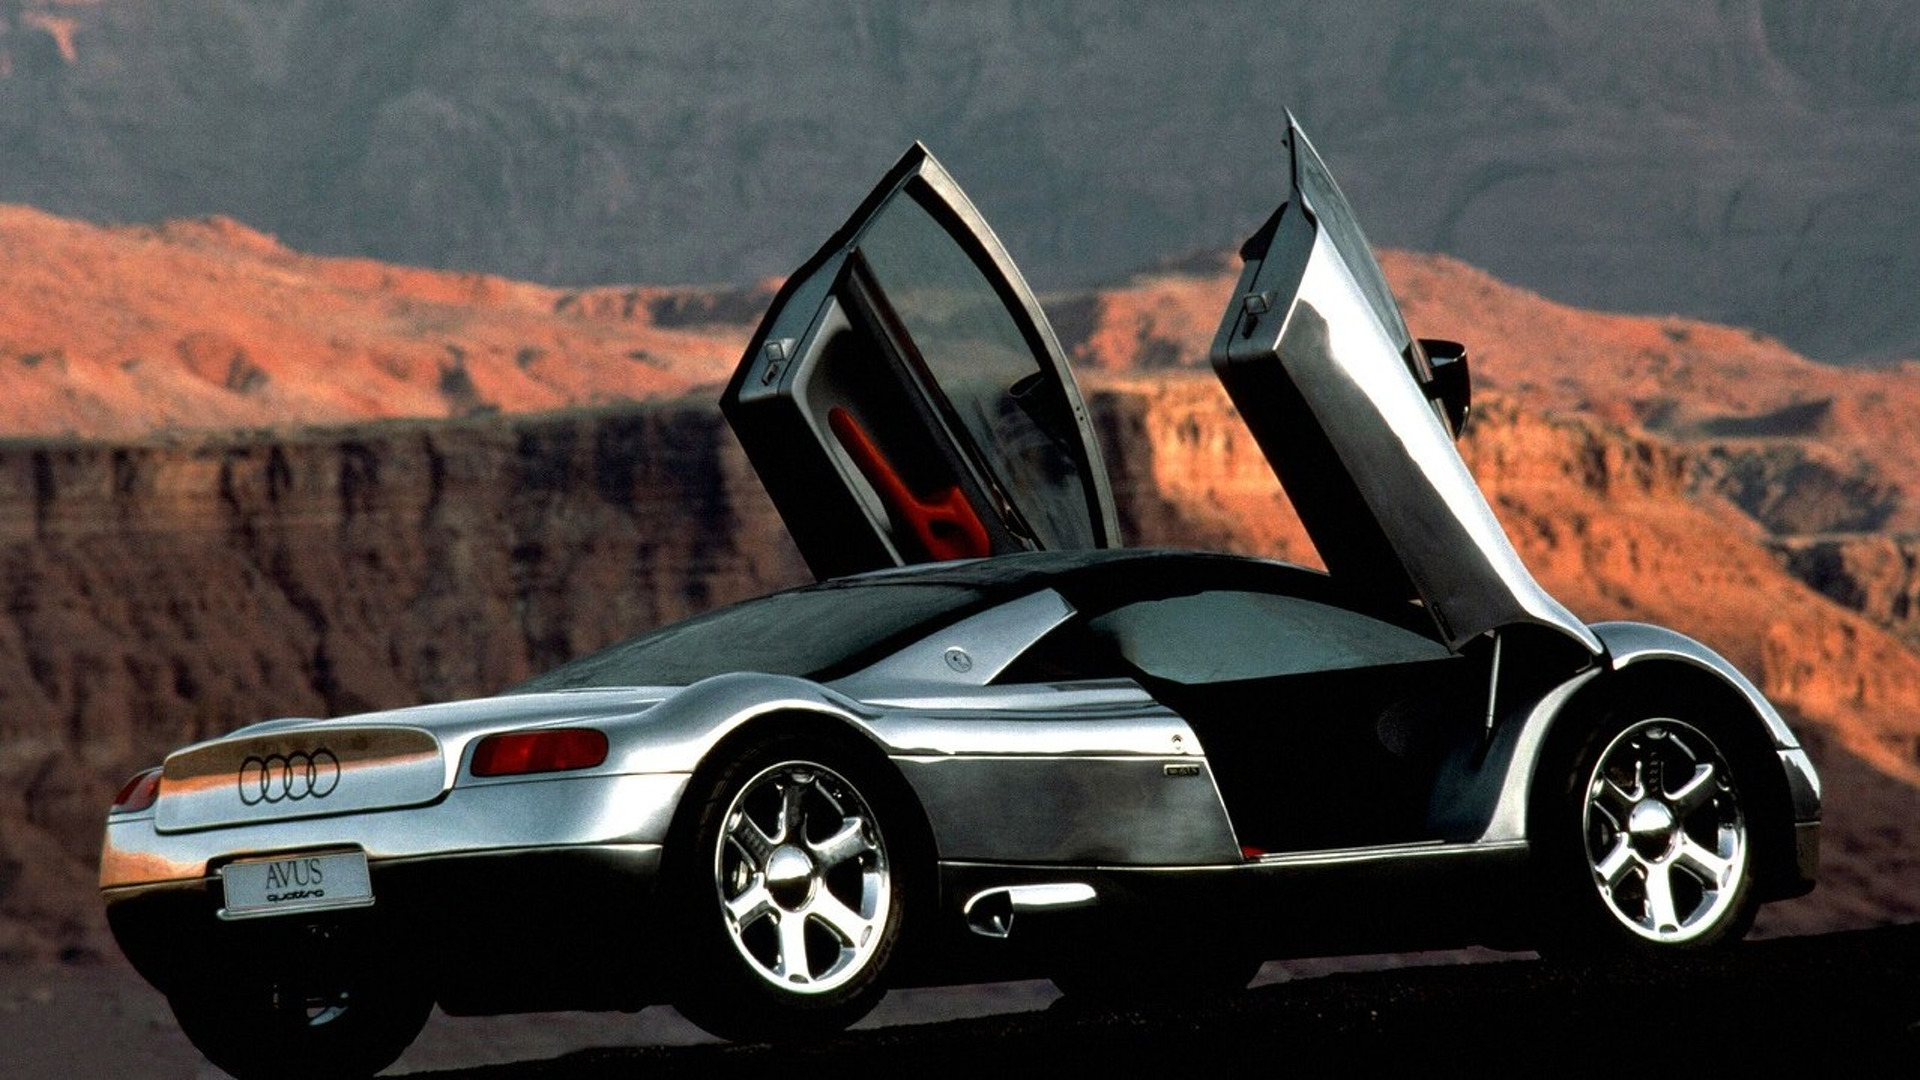 Audi's not used scissor doors since this concept, but put those iconic wheels into production.